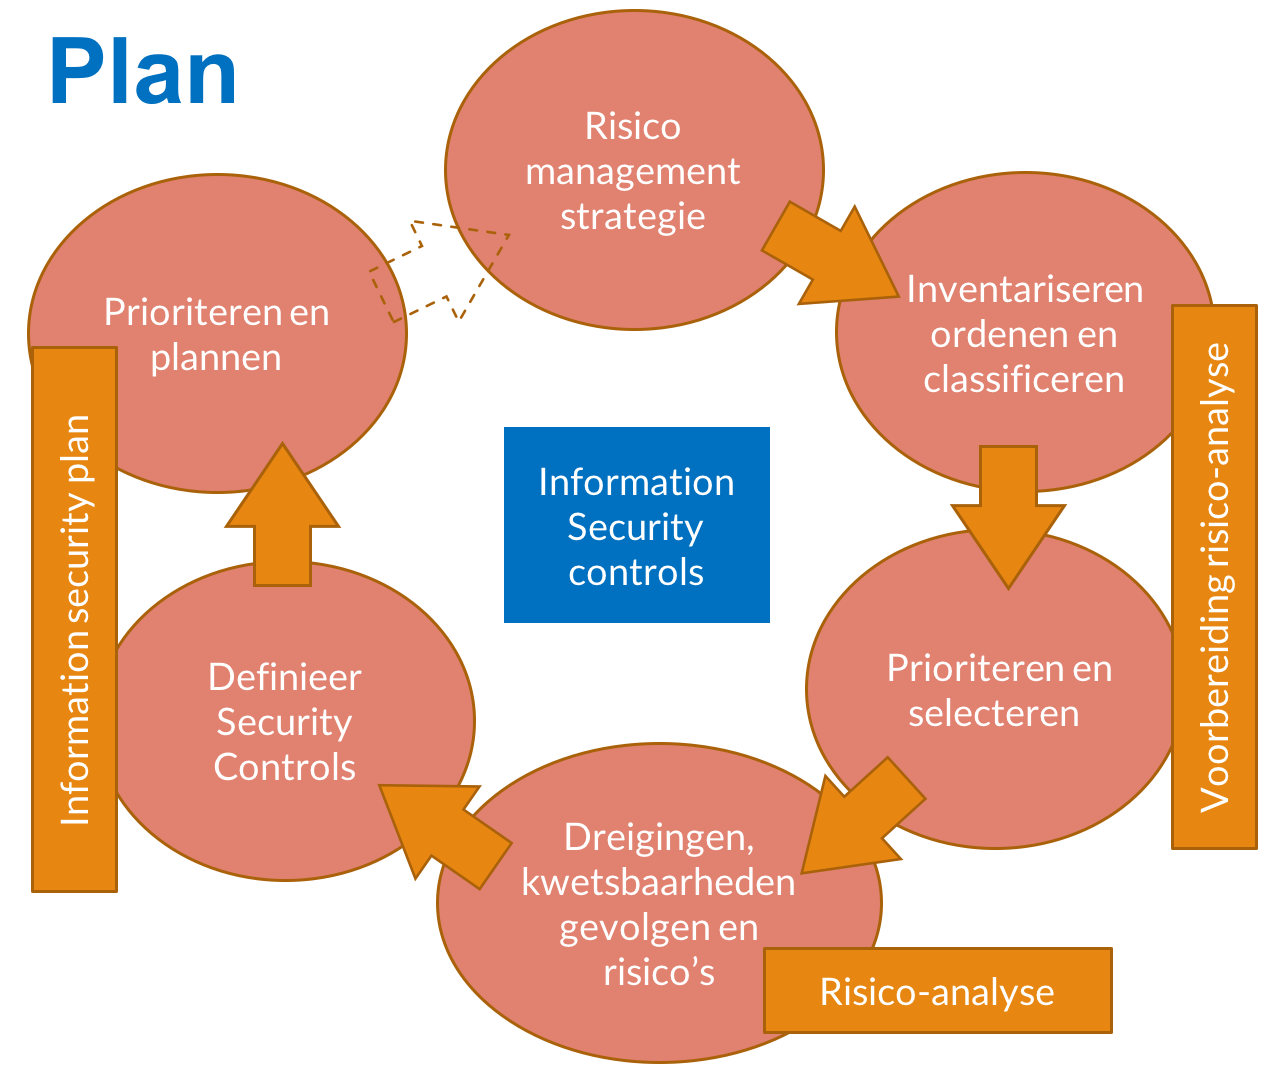 Security Business Plan